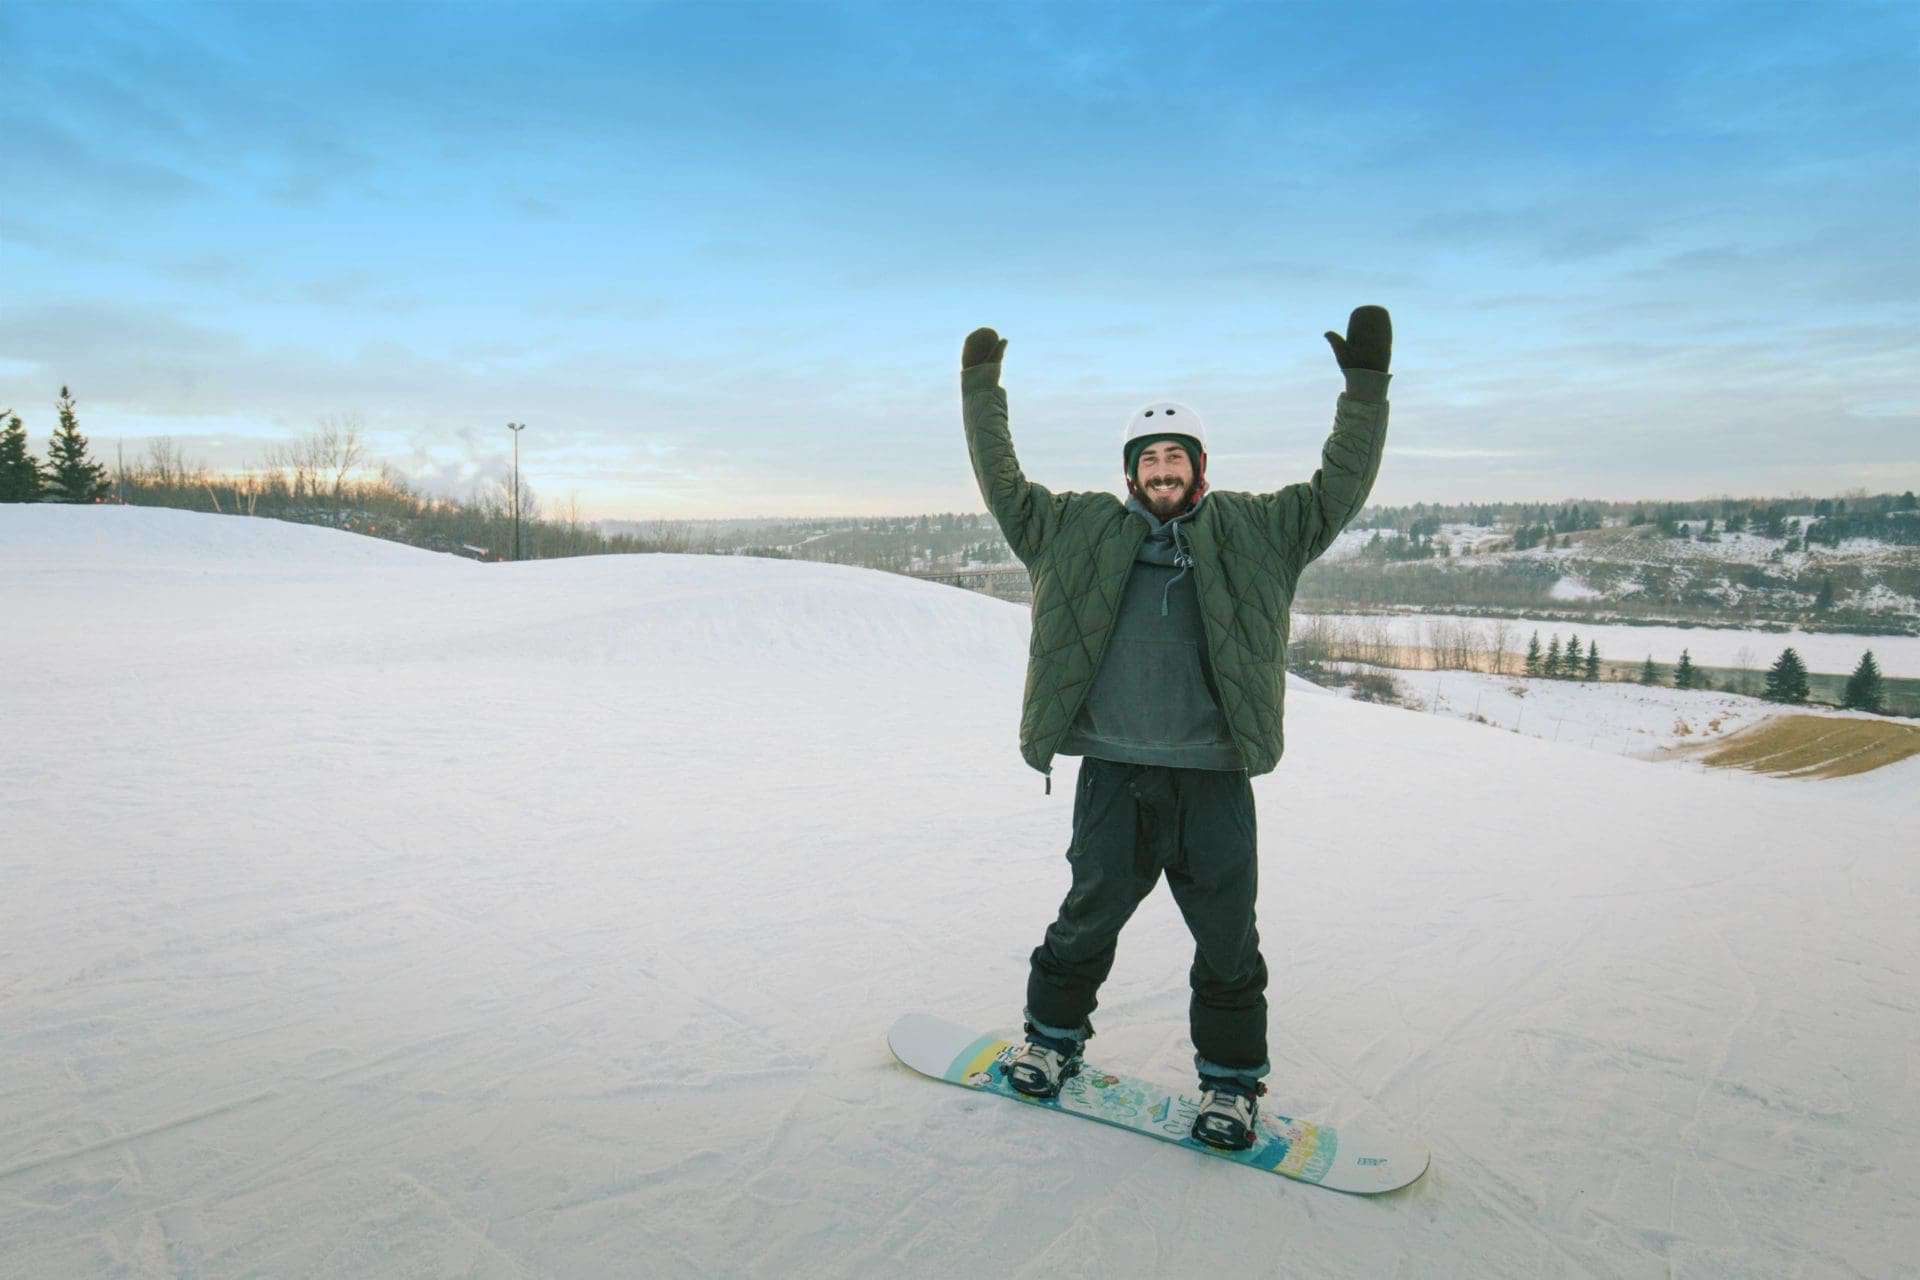 Featured Image for “5 Fun Family Ski Hills and Tubing Parks East of Edmonton”